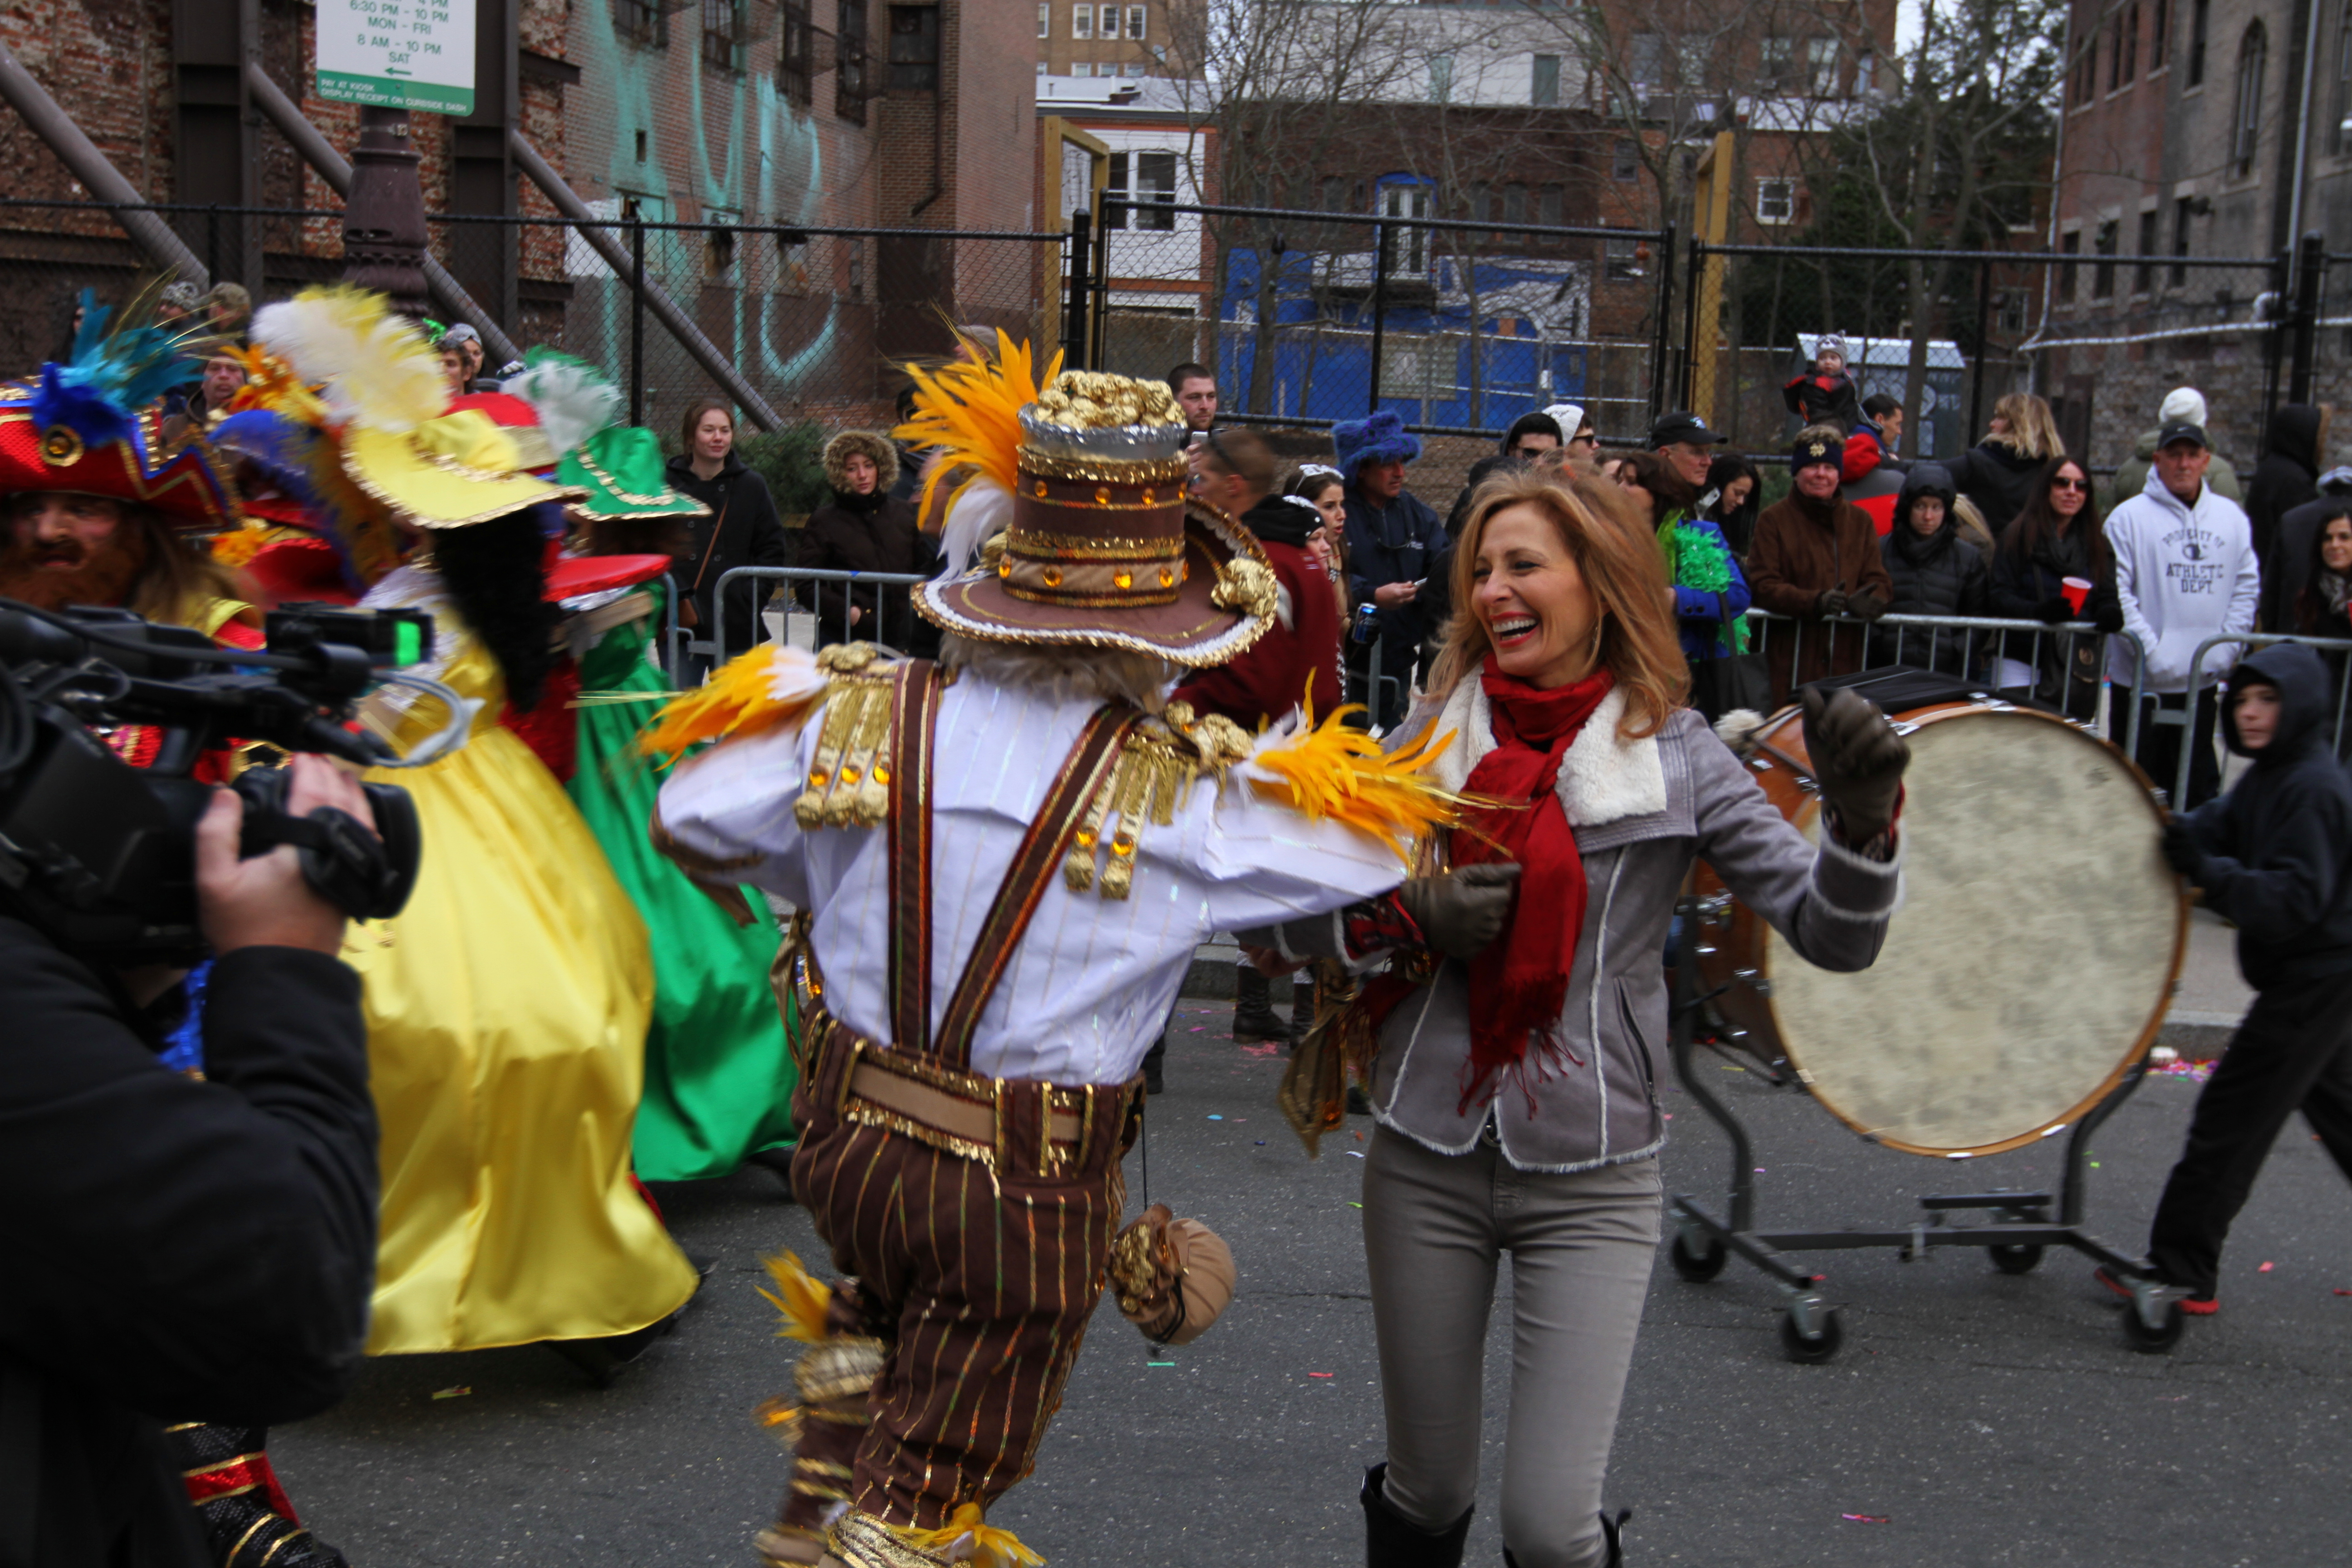 Linda joins in with the tradition of the Philadelphia Mummers Parade.